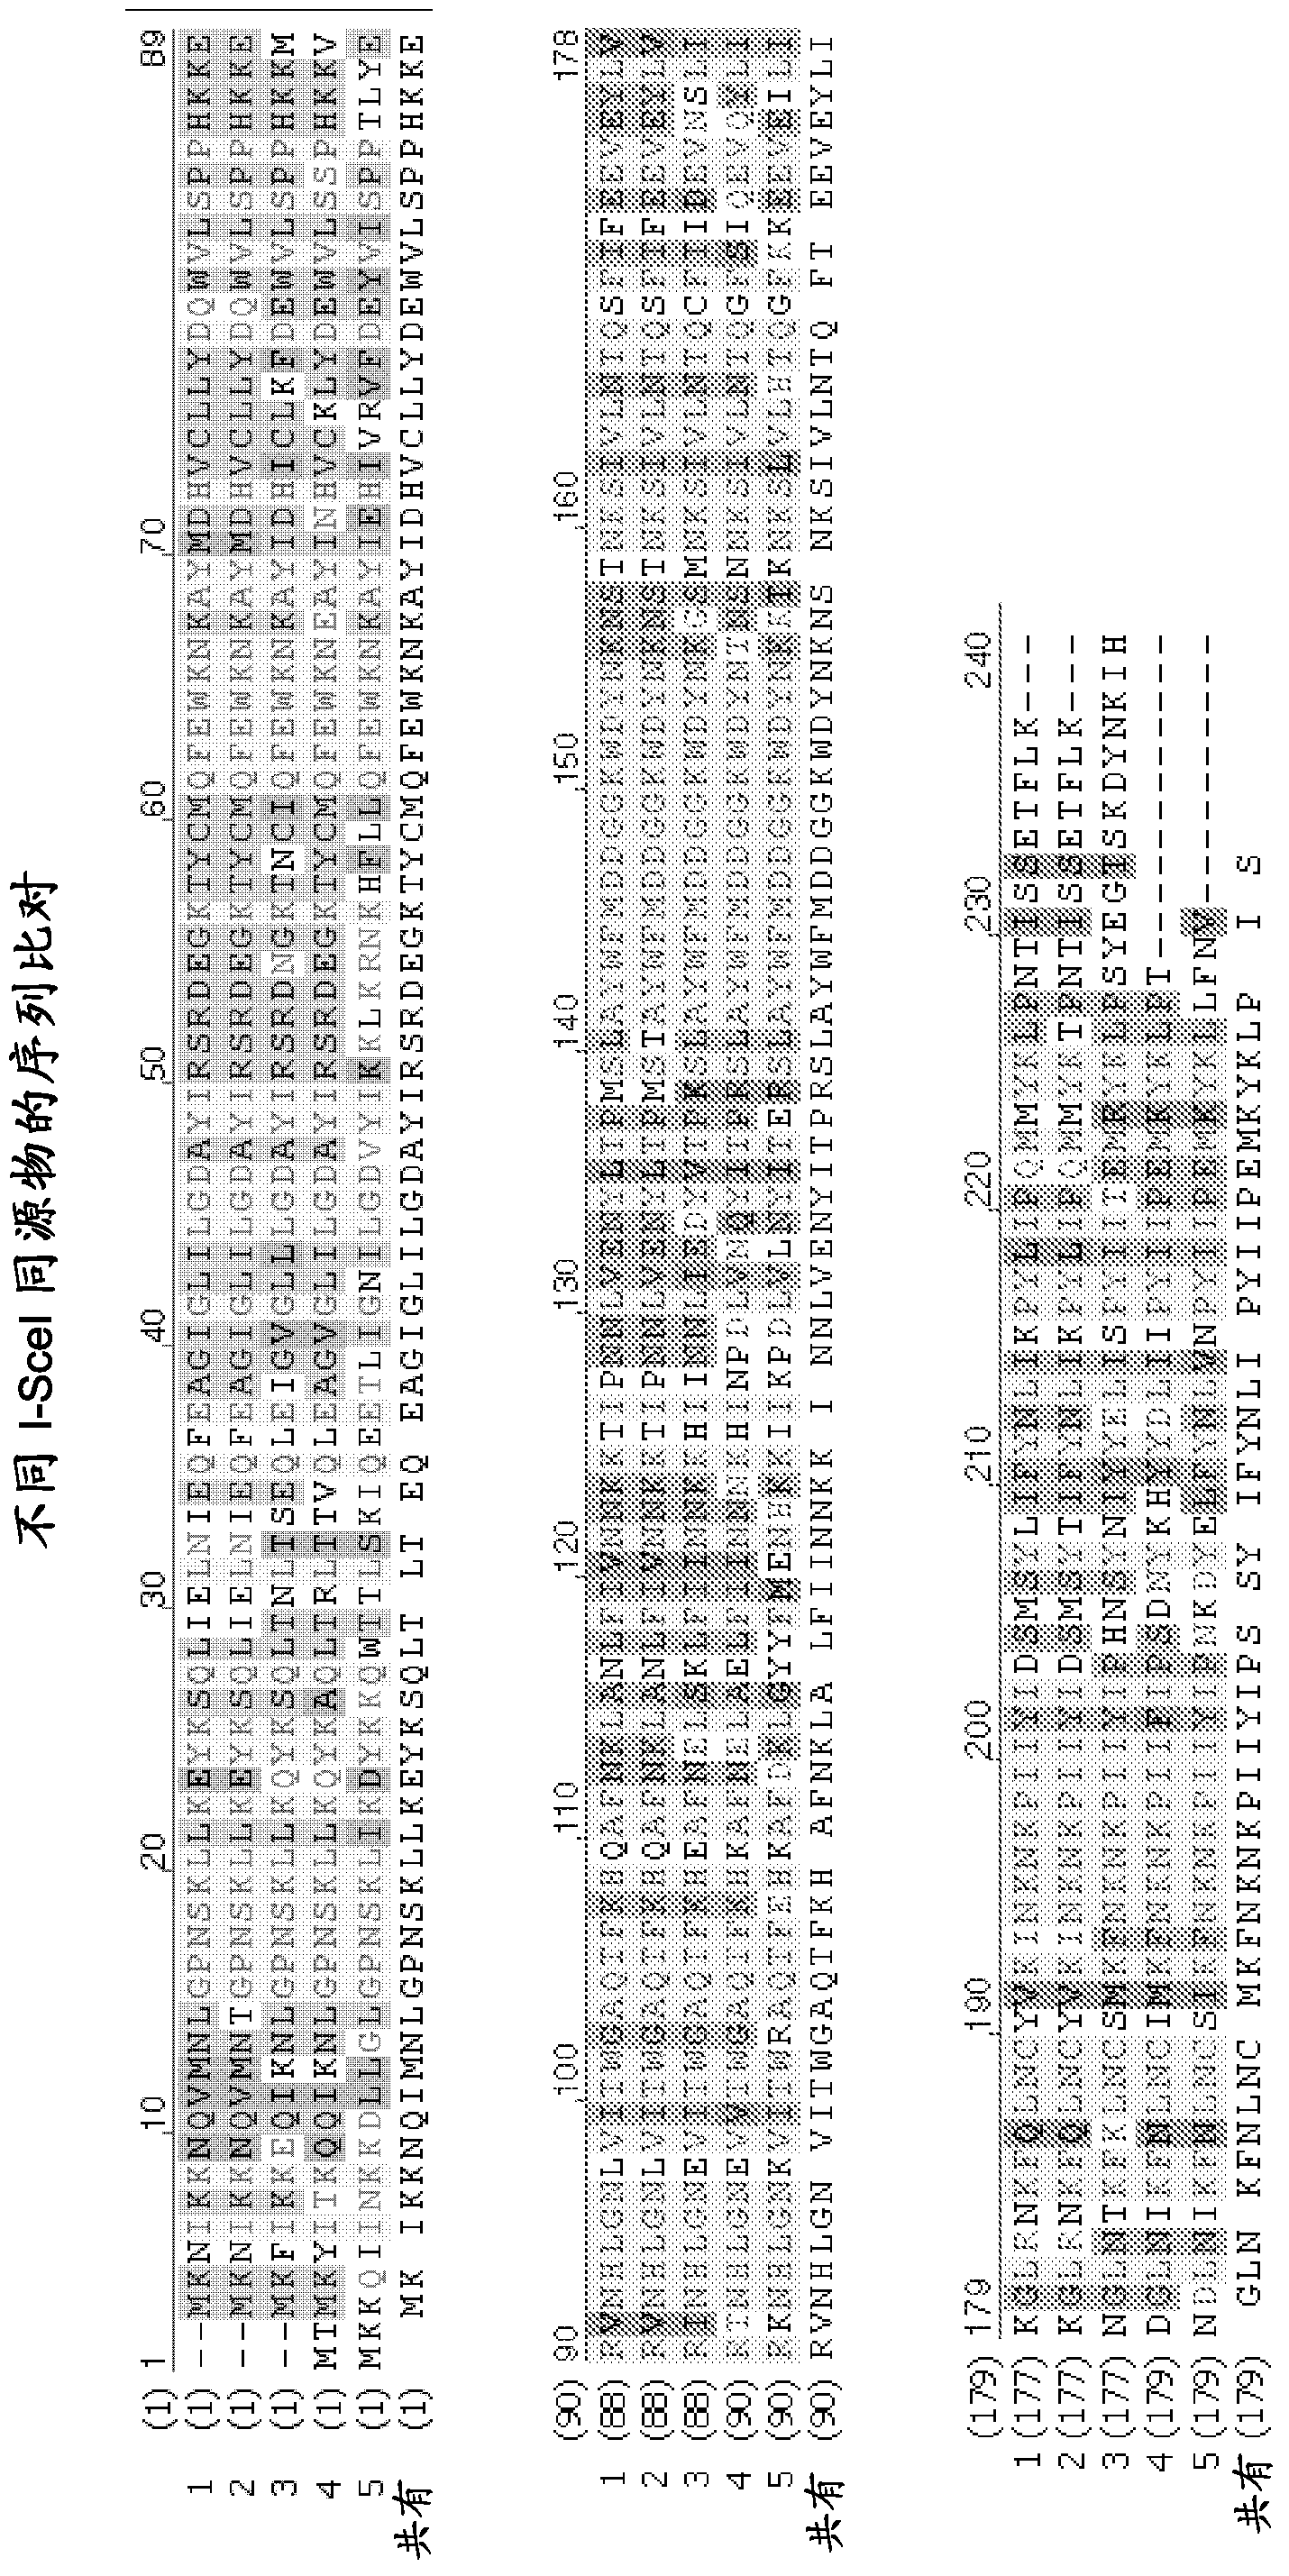 Optimized endonucleases and uses thereof